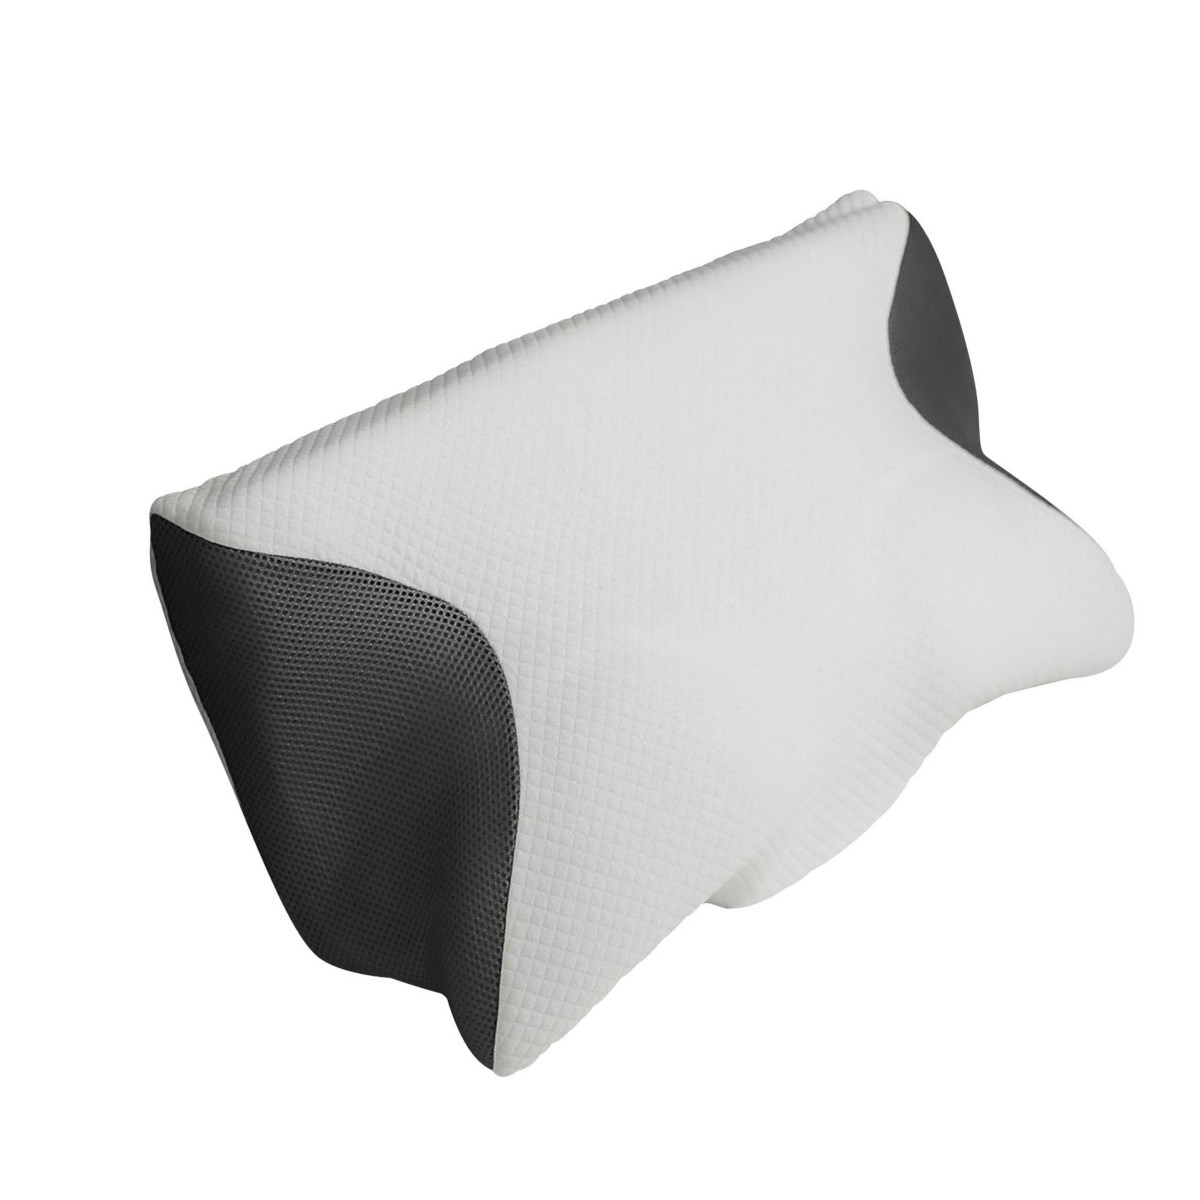 Dr Pillow Carbon Snorex Pillow In White